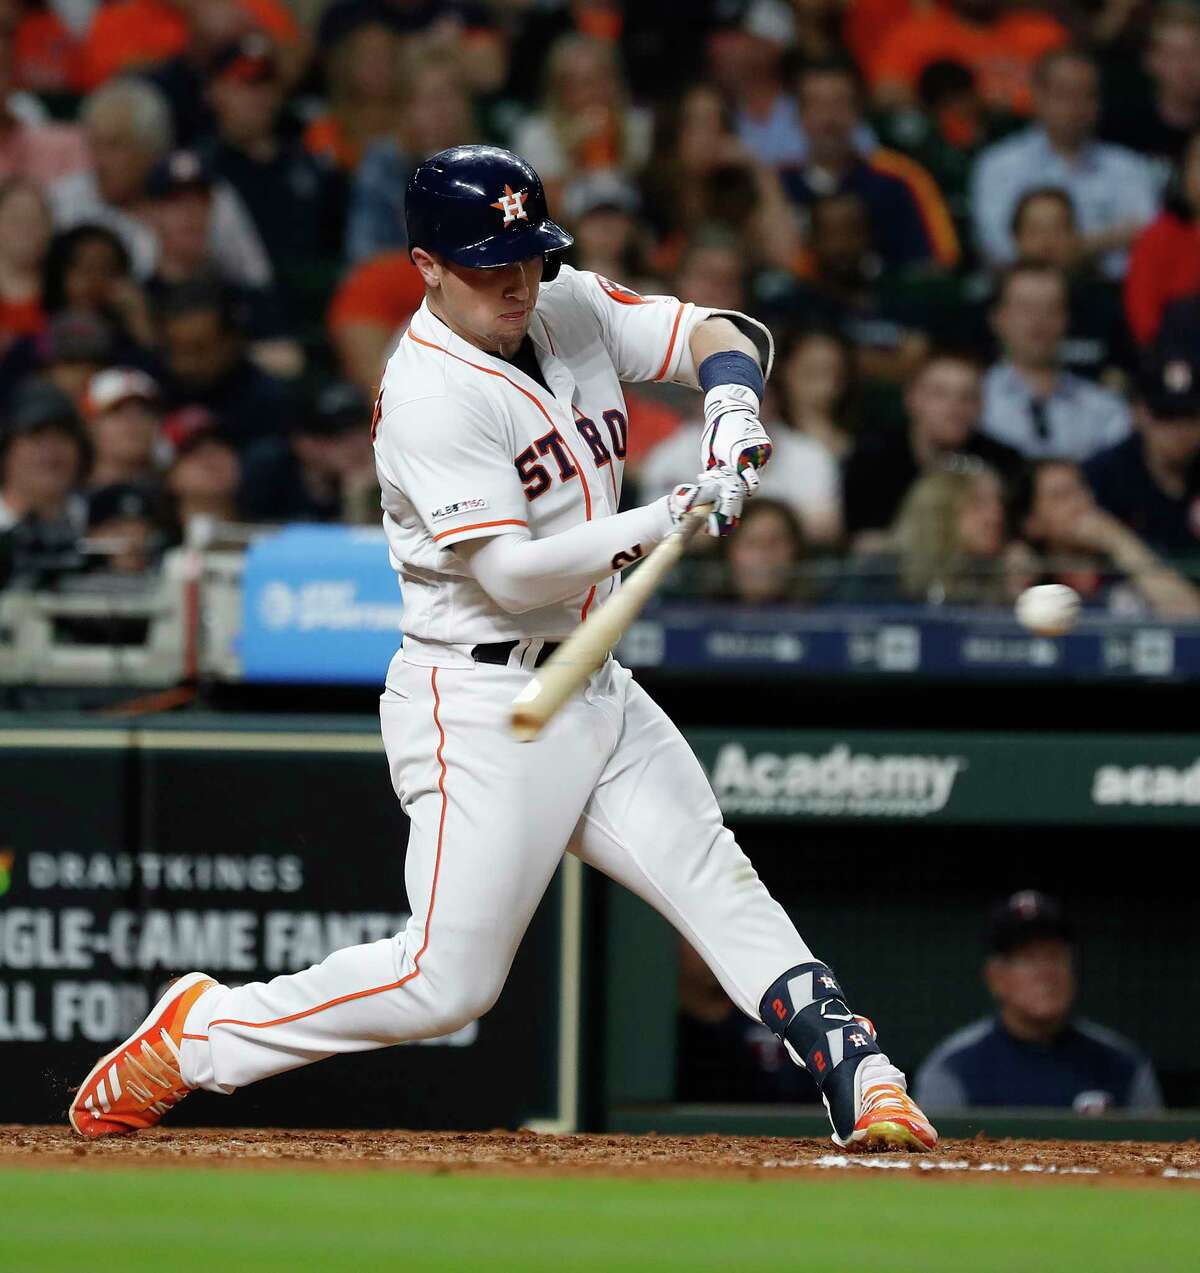 Houston Astros third baseman Alex Bregman (2) hits his RBI single during the fifth inning of an MLB baseball game at Minute Maid Park, Tuesday, April 23, 2019, in Houston.